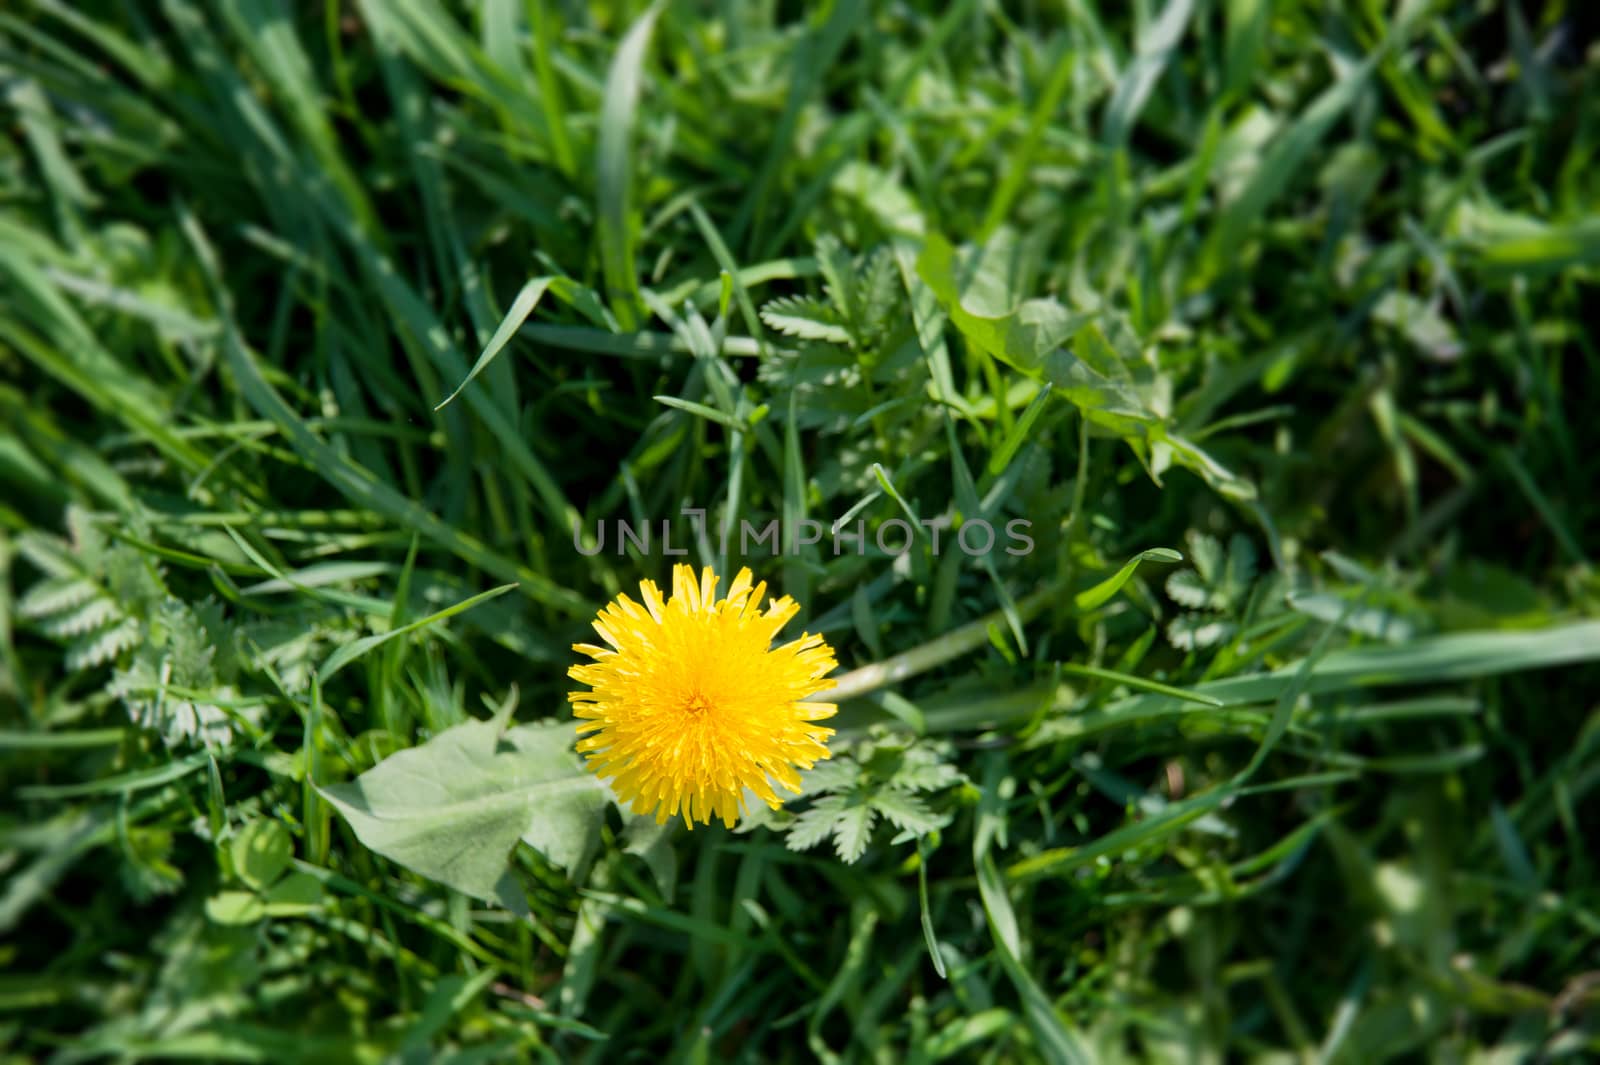 yellow dandelions on the lawn in summer